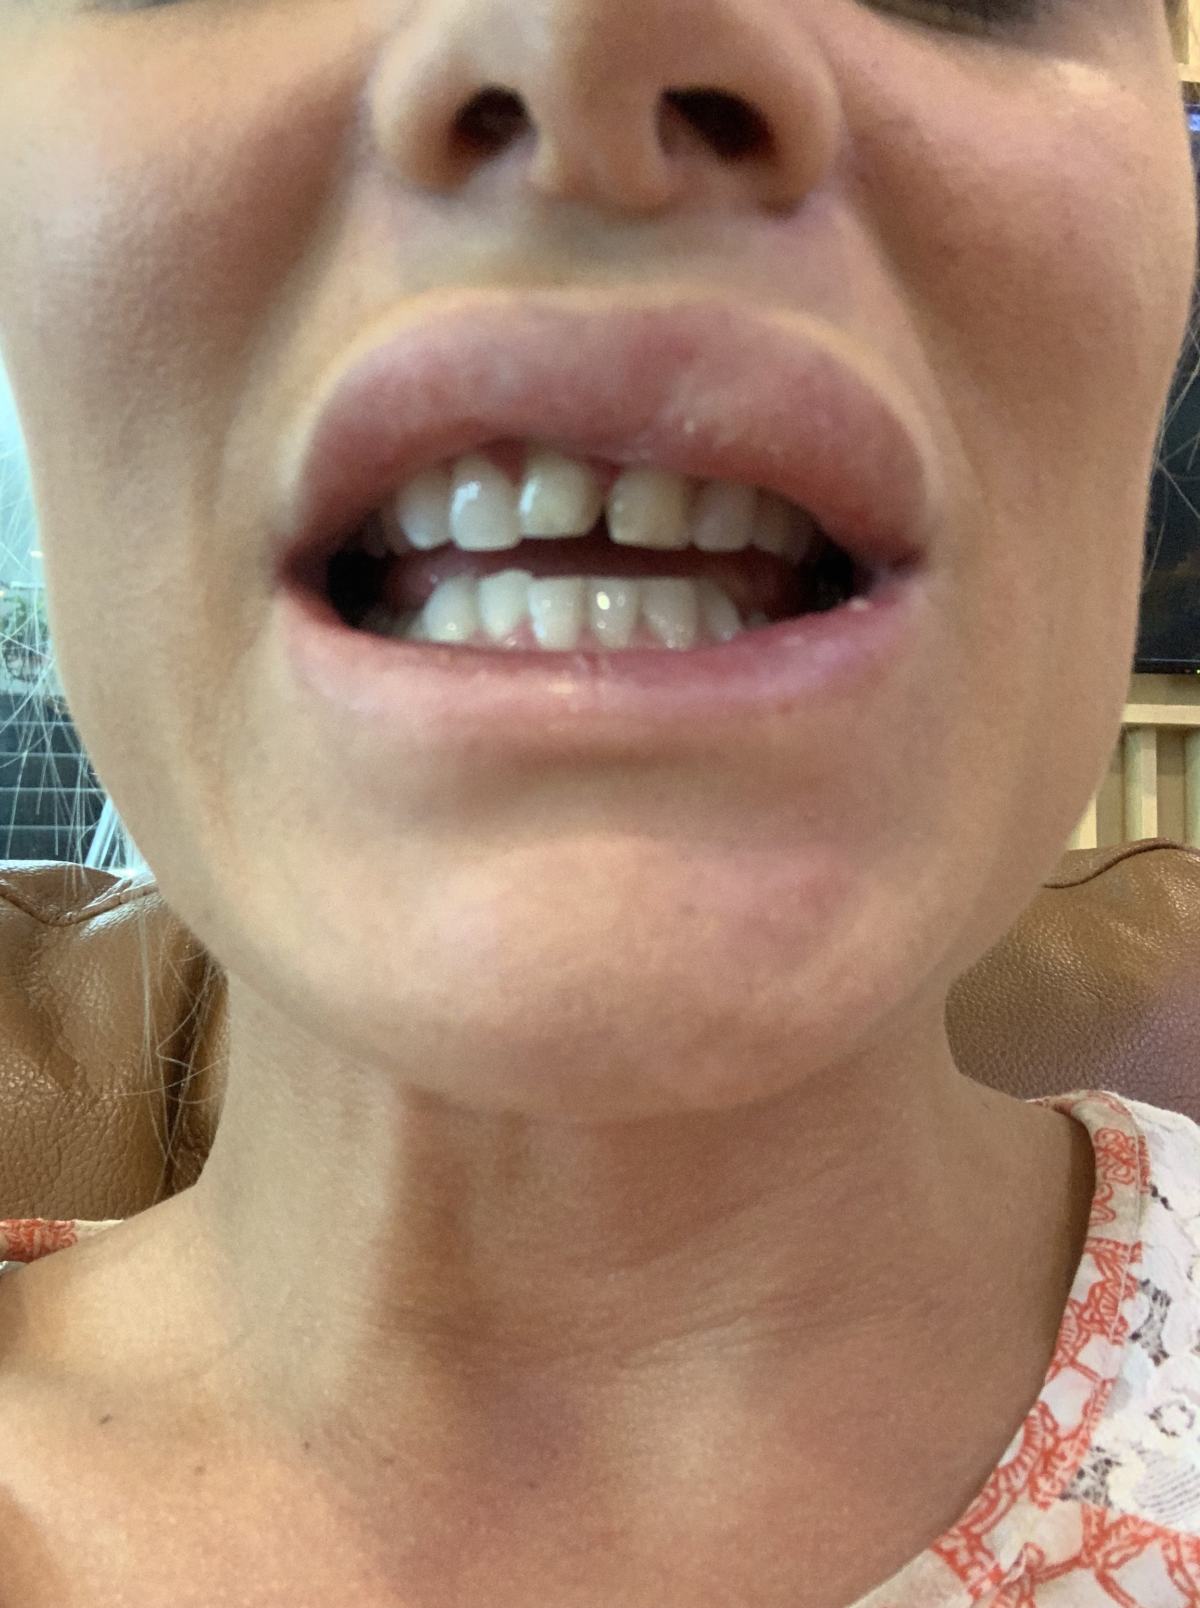 My two front teeth getting prepped for veneers